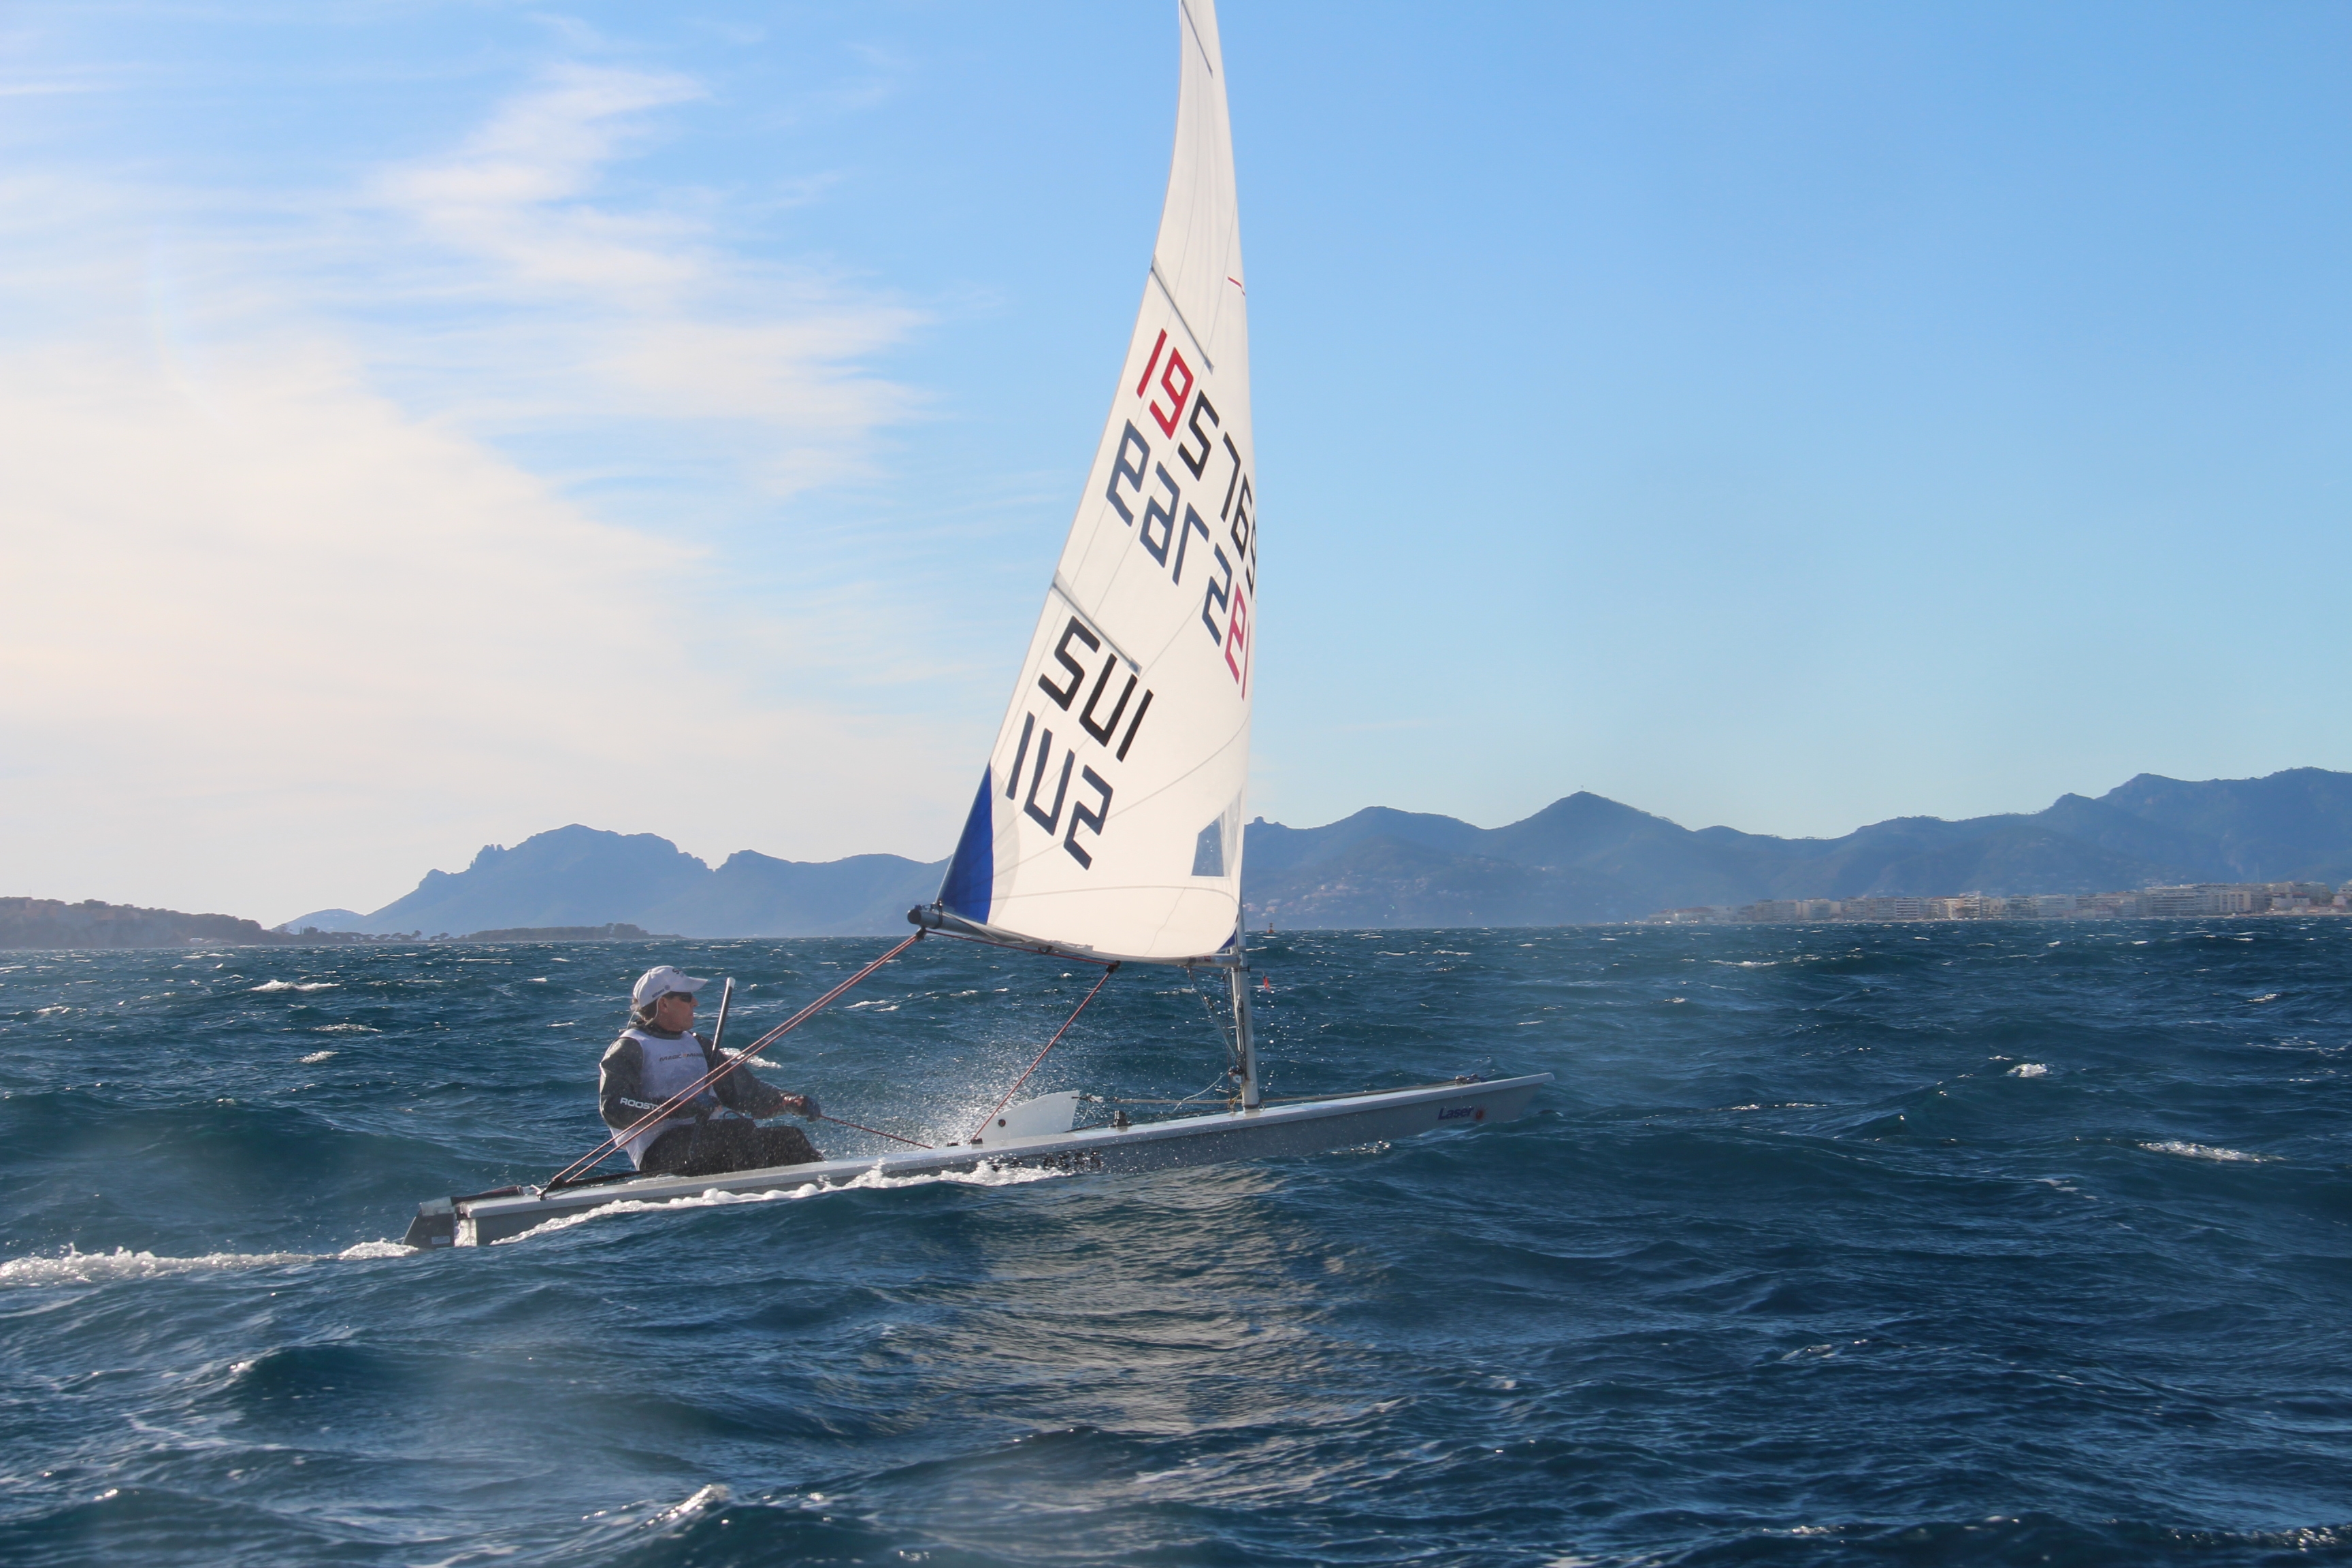  Laser  EuroMasters  Act 1  Antibes FRA  Final results